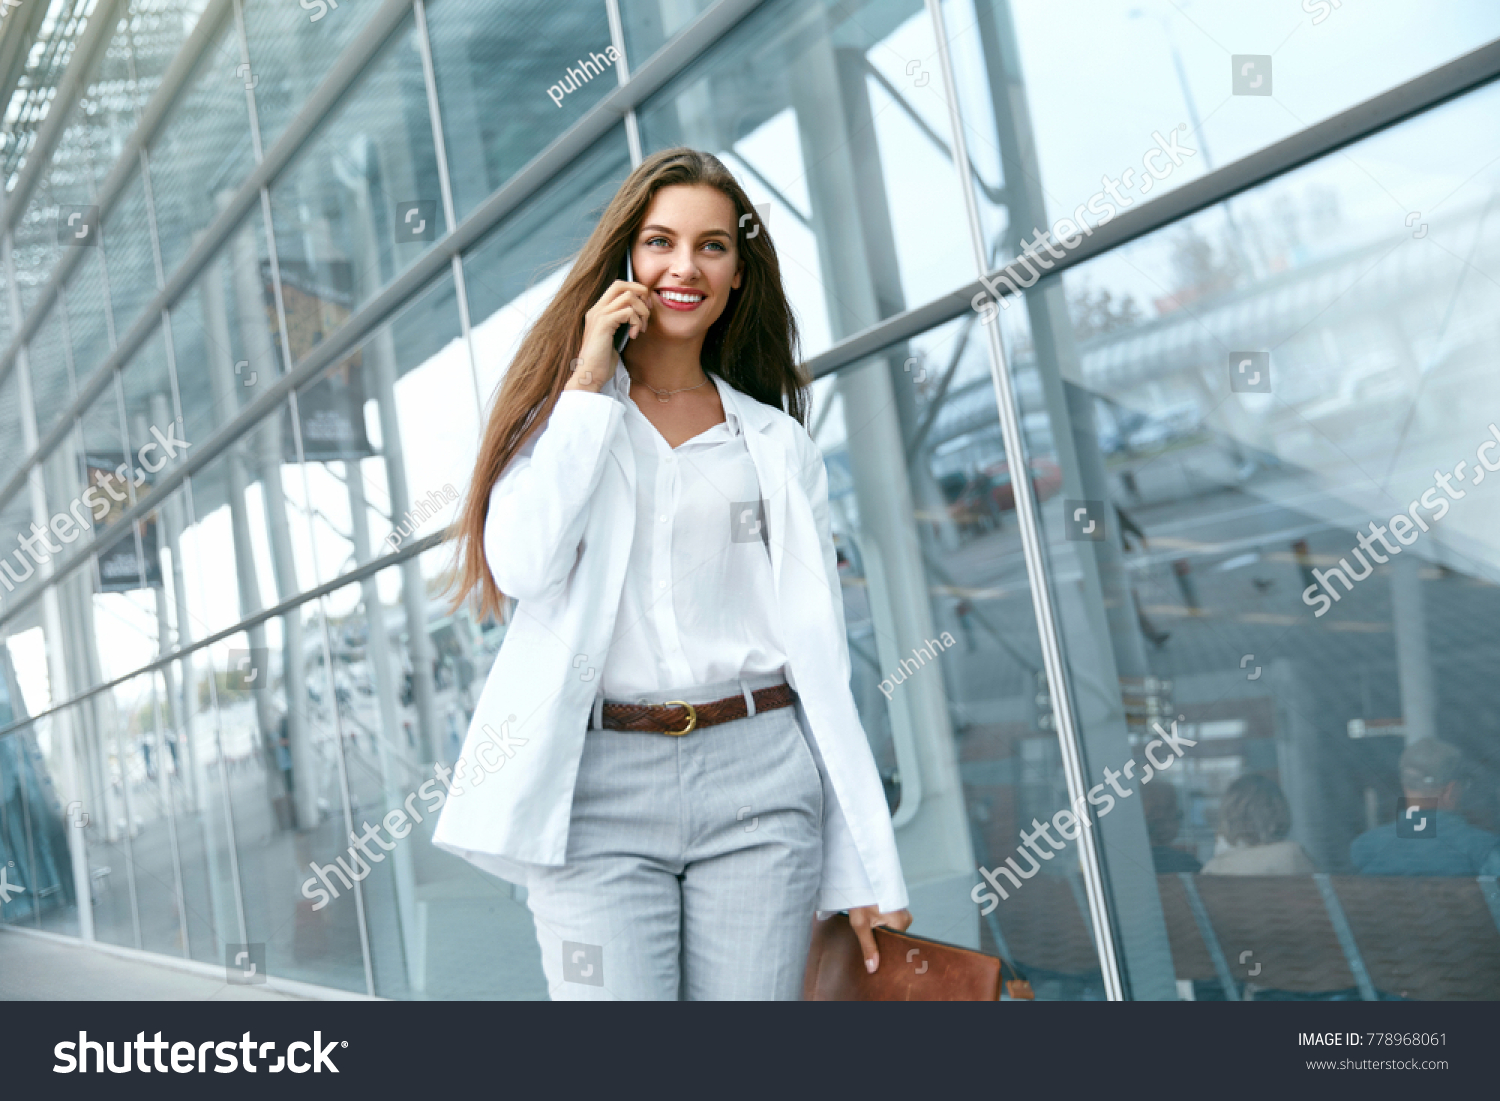 Business Woman With Phone Near Office. Portrait Of Beautiful Smiling Female In Fashion Office Clothes Talking On Phone While Standing Outdoors. Phone Communication. High Quality Image. #778968061